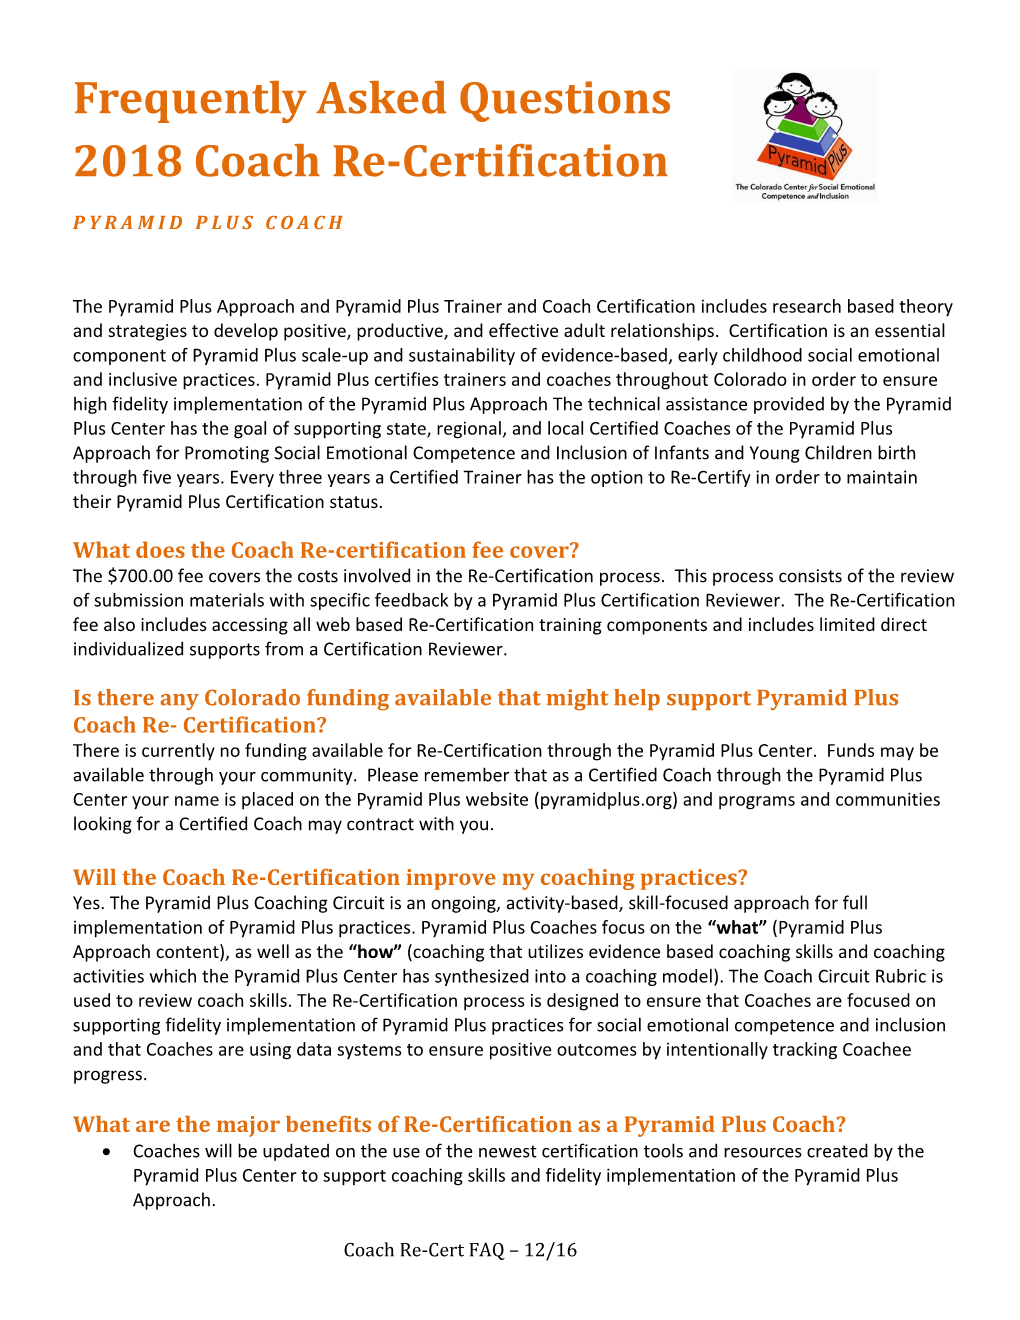 What Does the Coach Re-Certification Fee Cover?